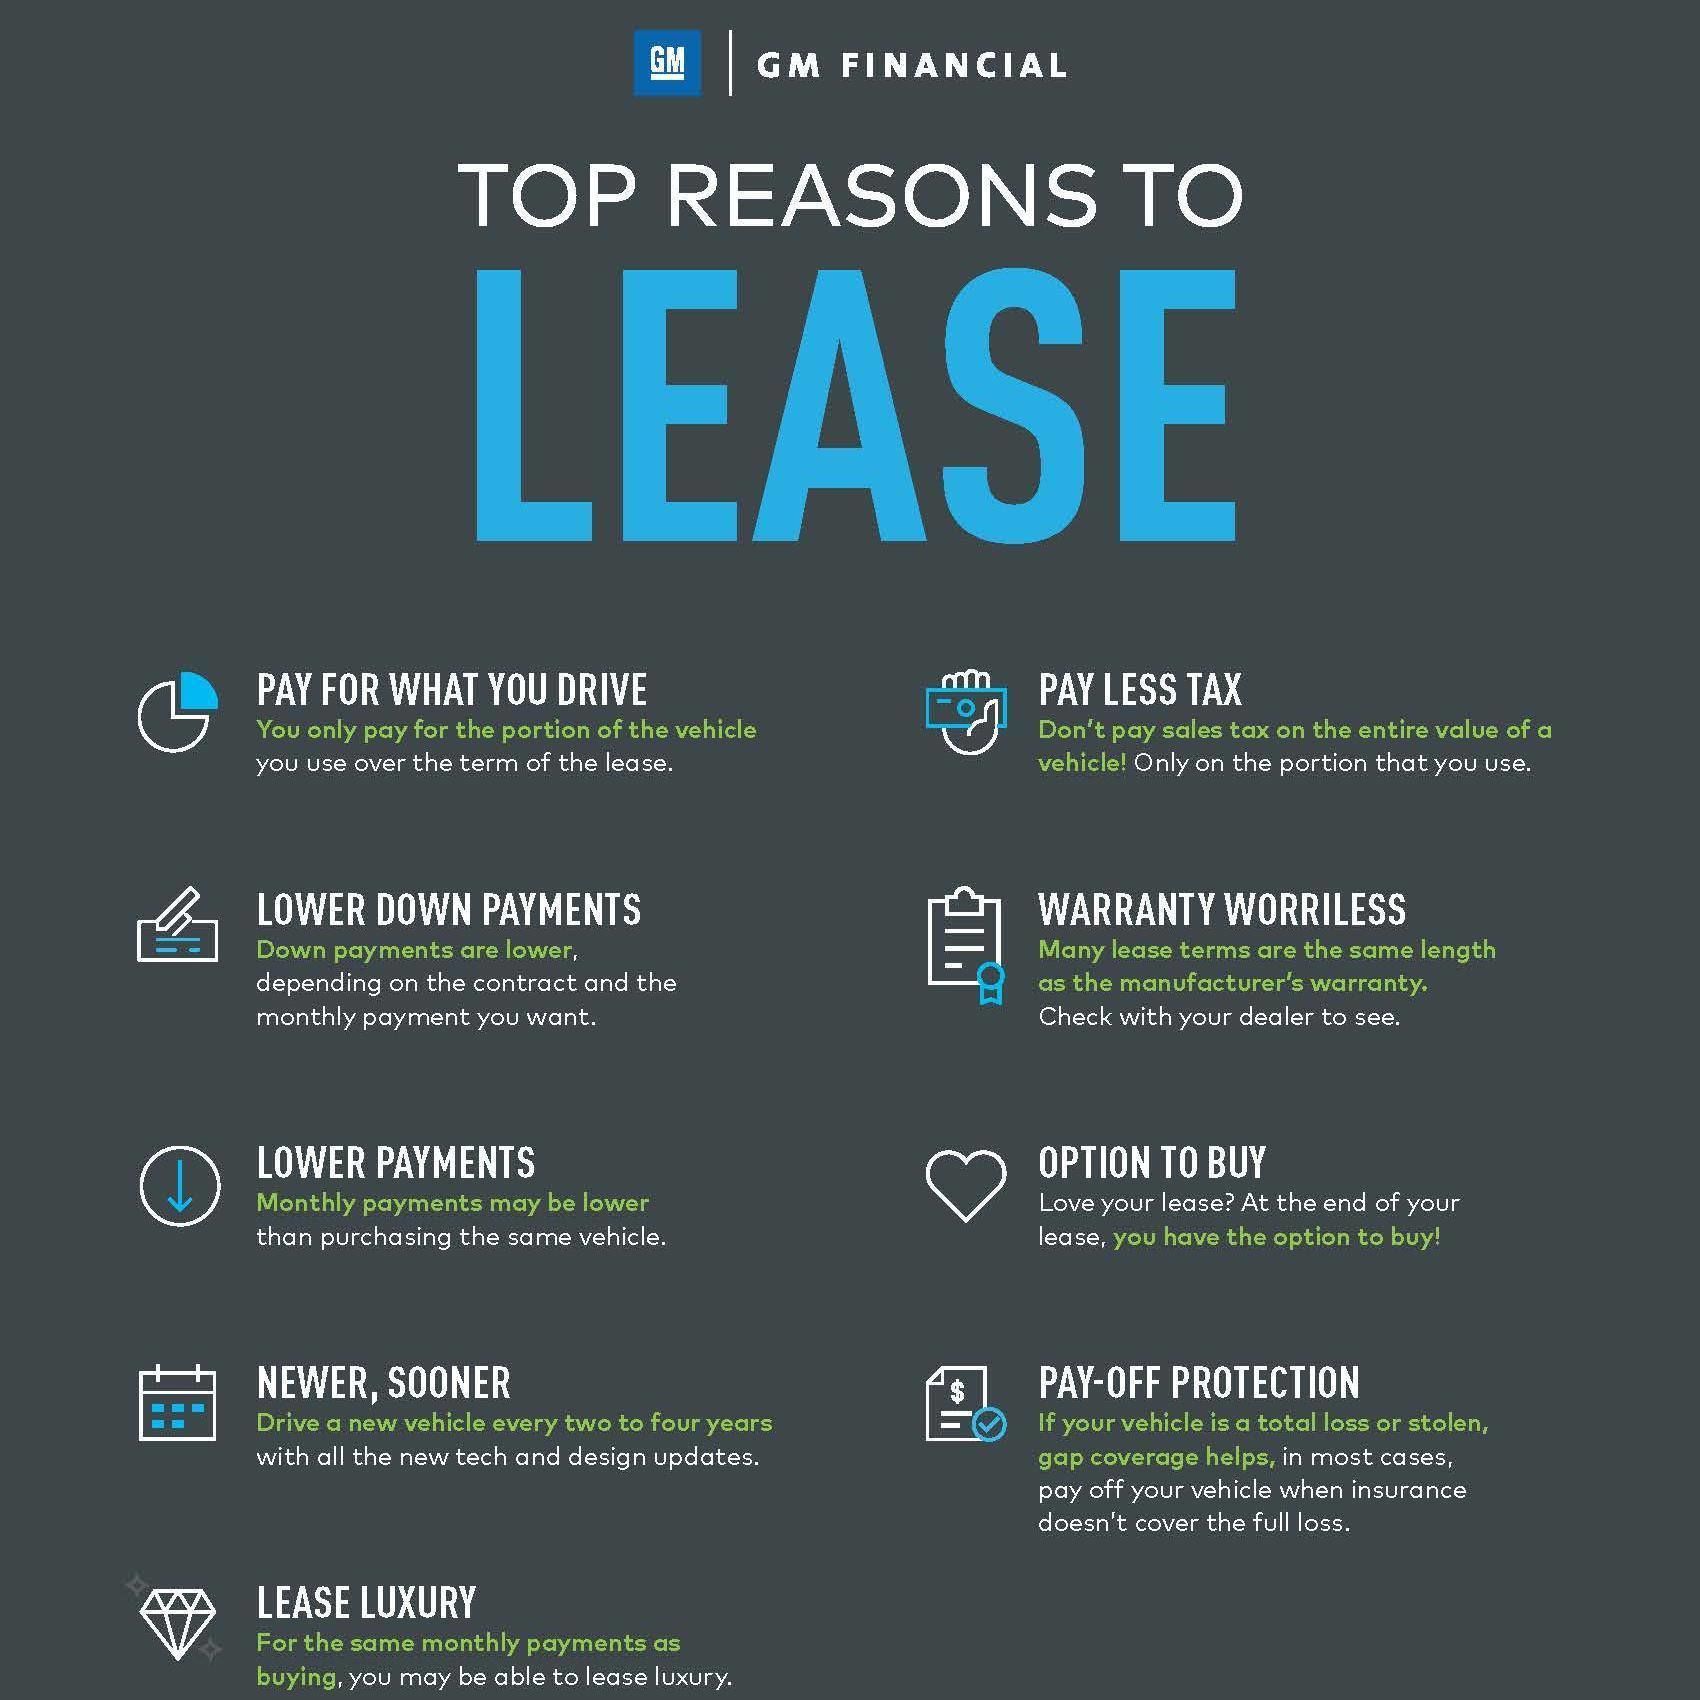 So, is leasing right for you?